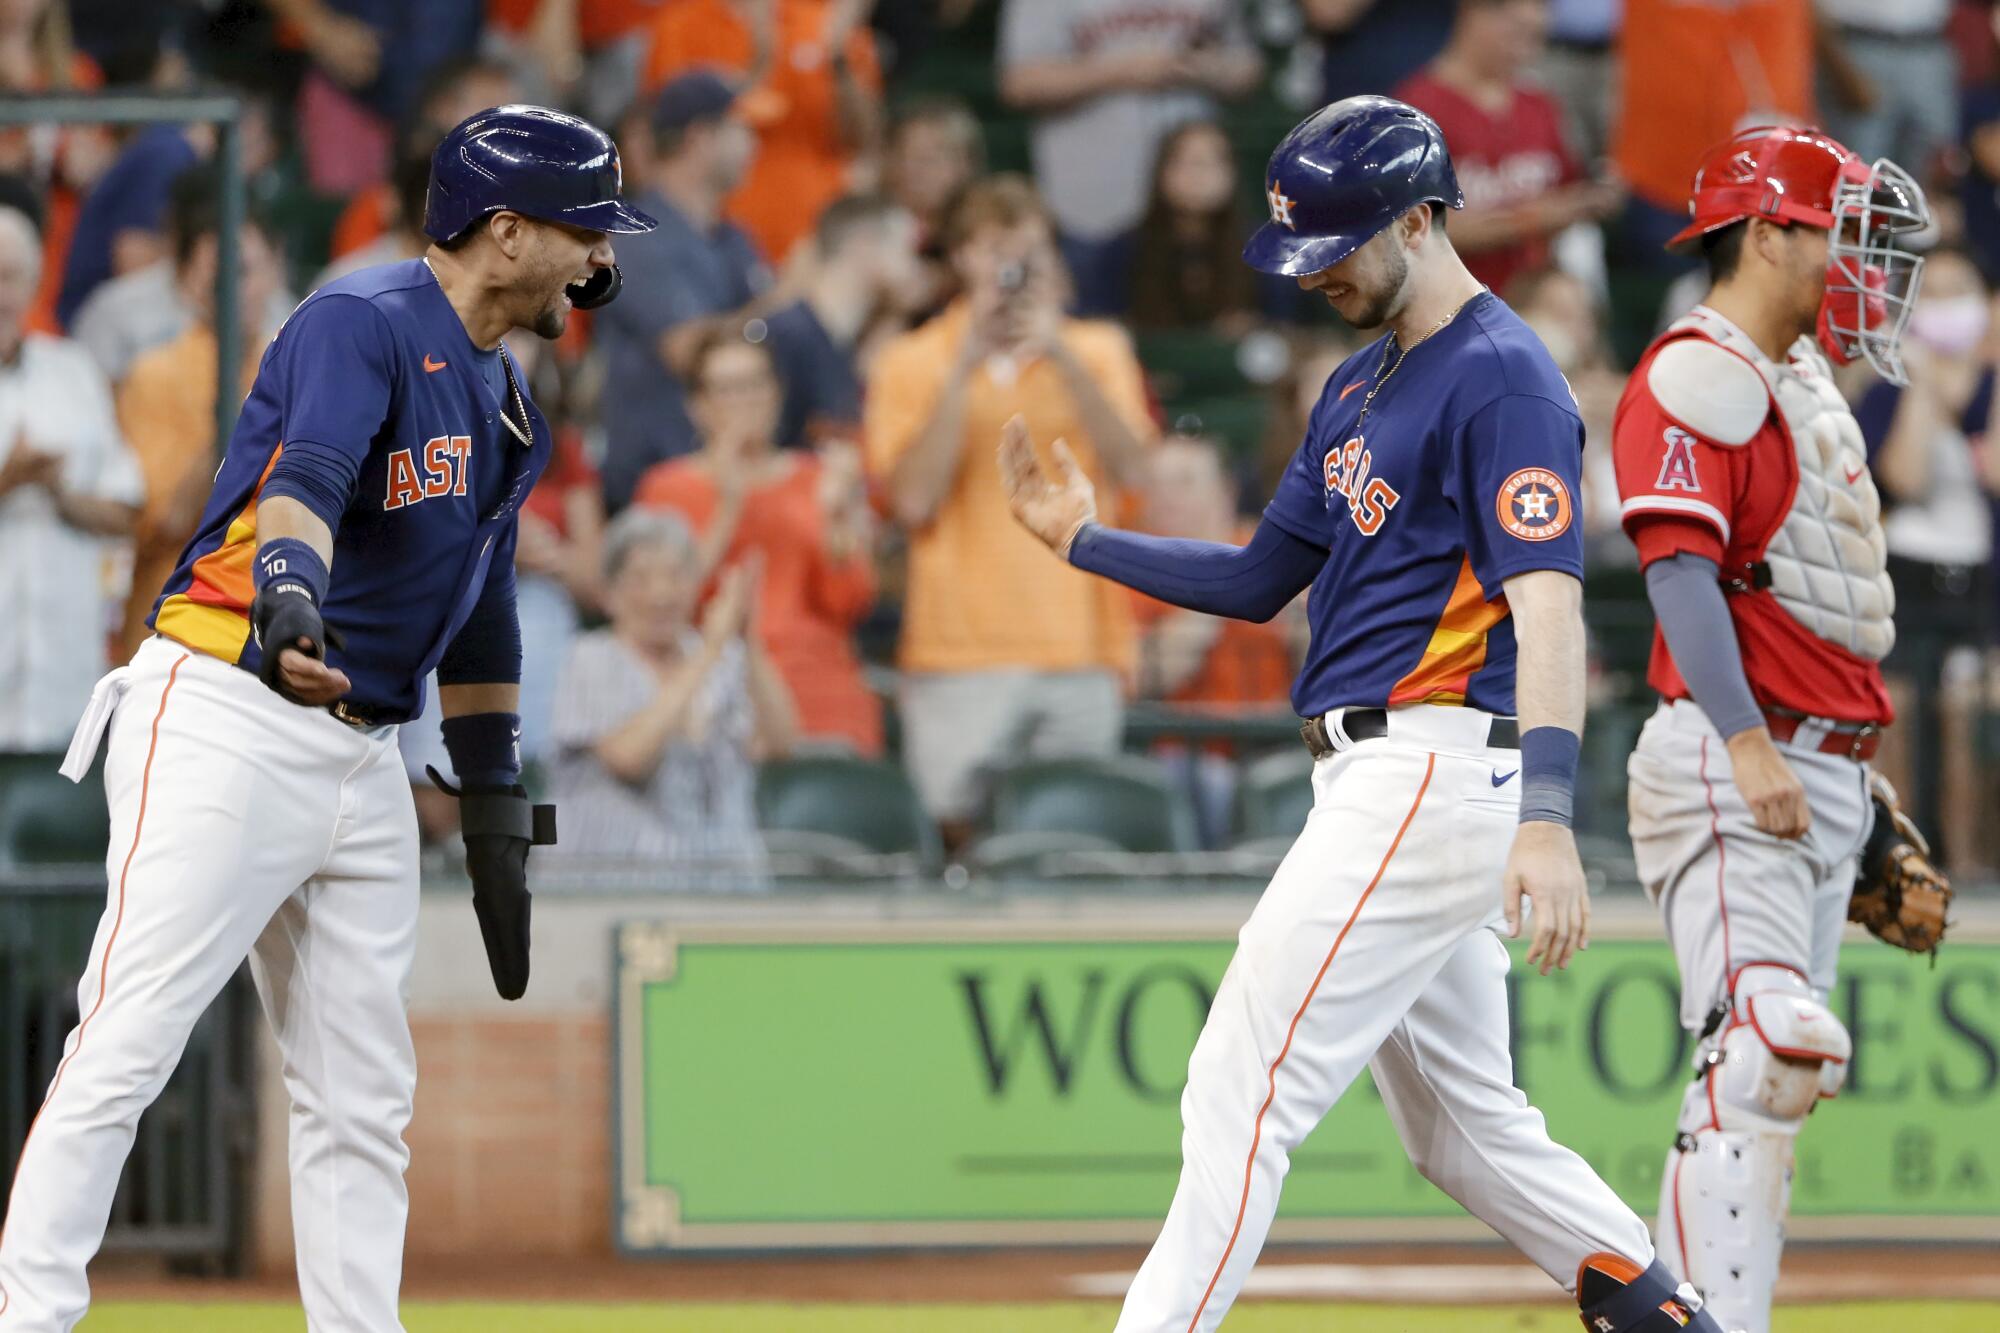 Houston's Kyle Tucker, right, celebrates with teammate Yuli Gurriel after hitting a two-run home run.